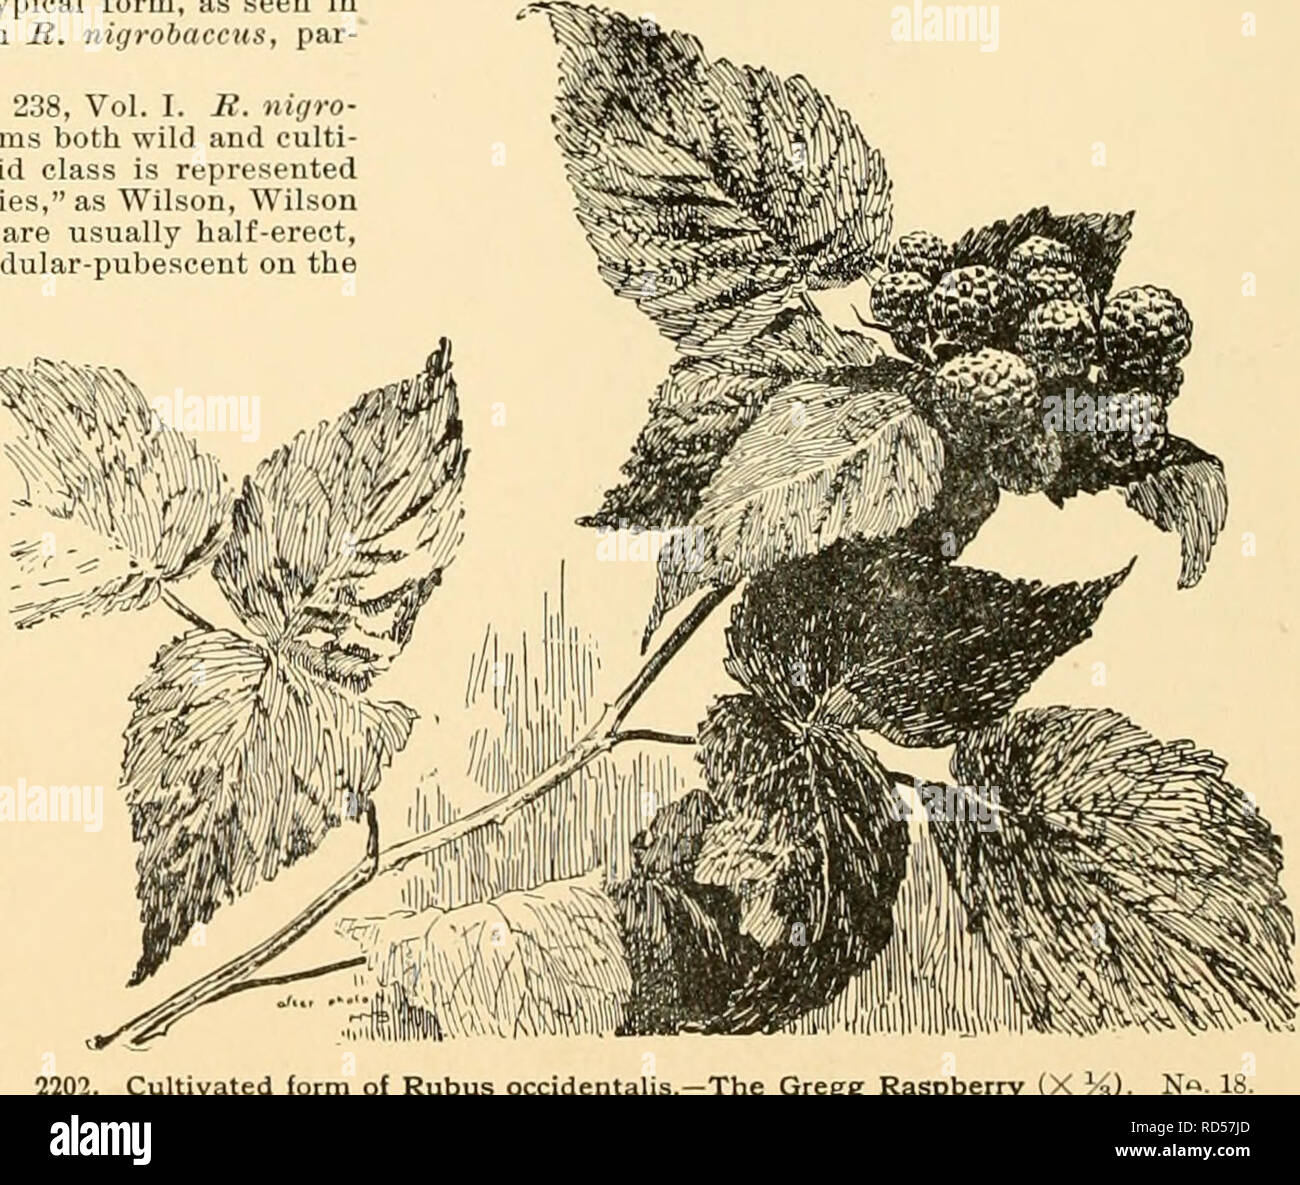 . Cyclopedia of American horticulture : comprising suggestions for cultivation of horticultural plants, descriptions of the species of fruits, vegetables, flowers, and ornamental plants sold in the United States and Canada, together with geographical and biographical sketches. Gardening; Horticulture; Horticulture; Horticulture. 2203. Rubus laciniatus (X âDistinct in its extreme forms, but running into the species by all manner of intermediate gradations. From this plant the common &quot;Short-cluster Blackberries&quot; of the garden appear to be derived, as Snyder, Kittatinny, Erie, etc. 23.  Stock Photo